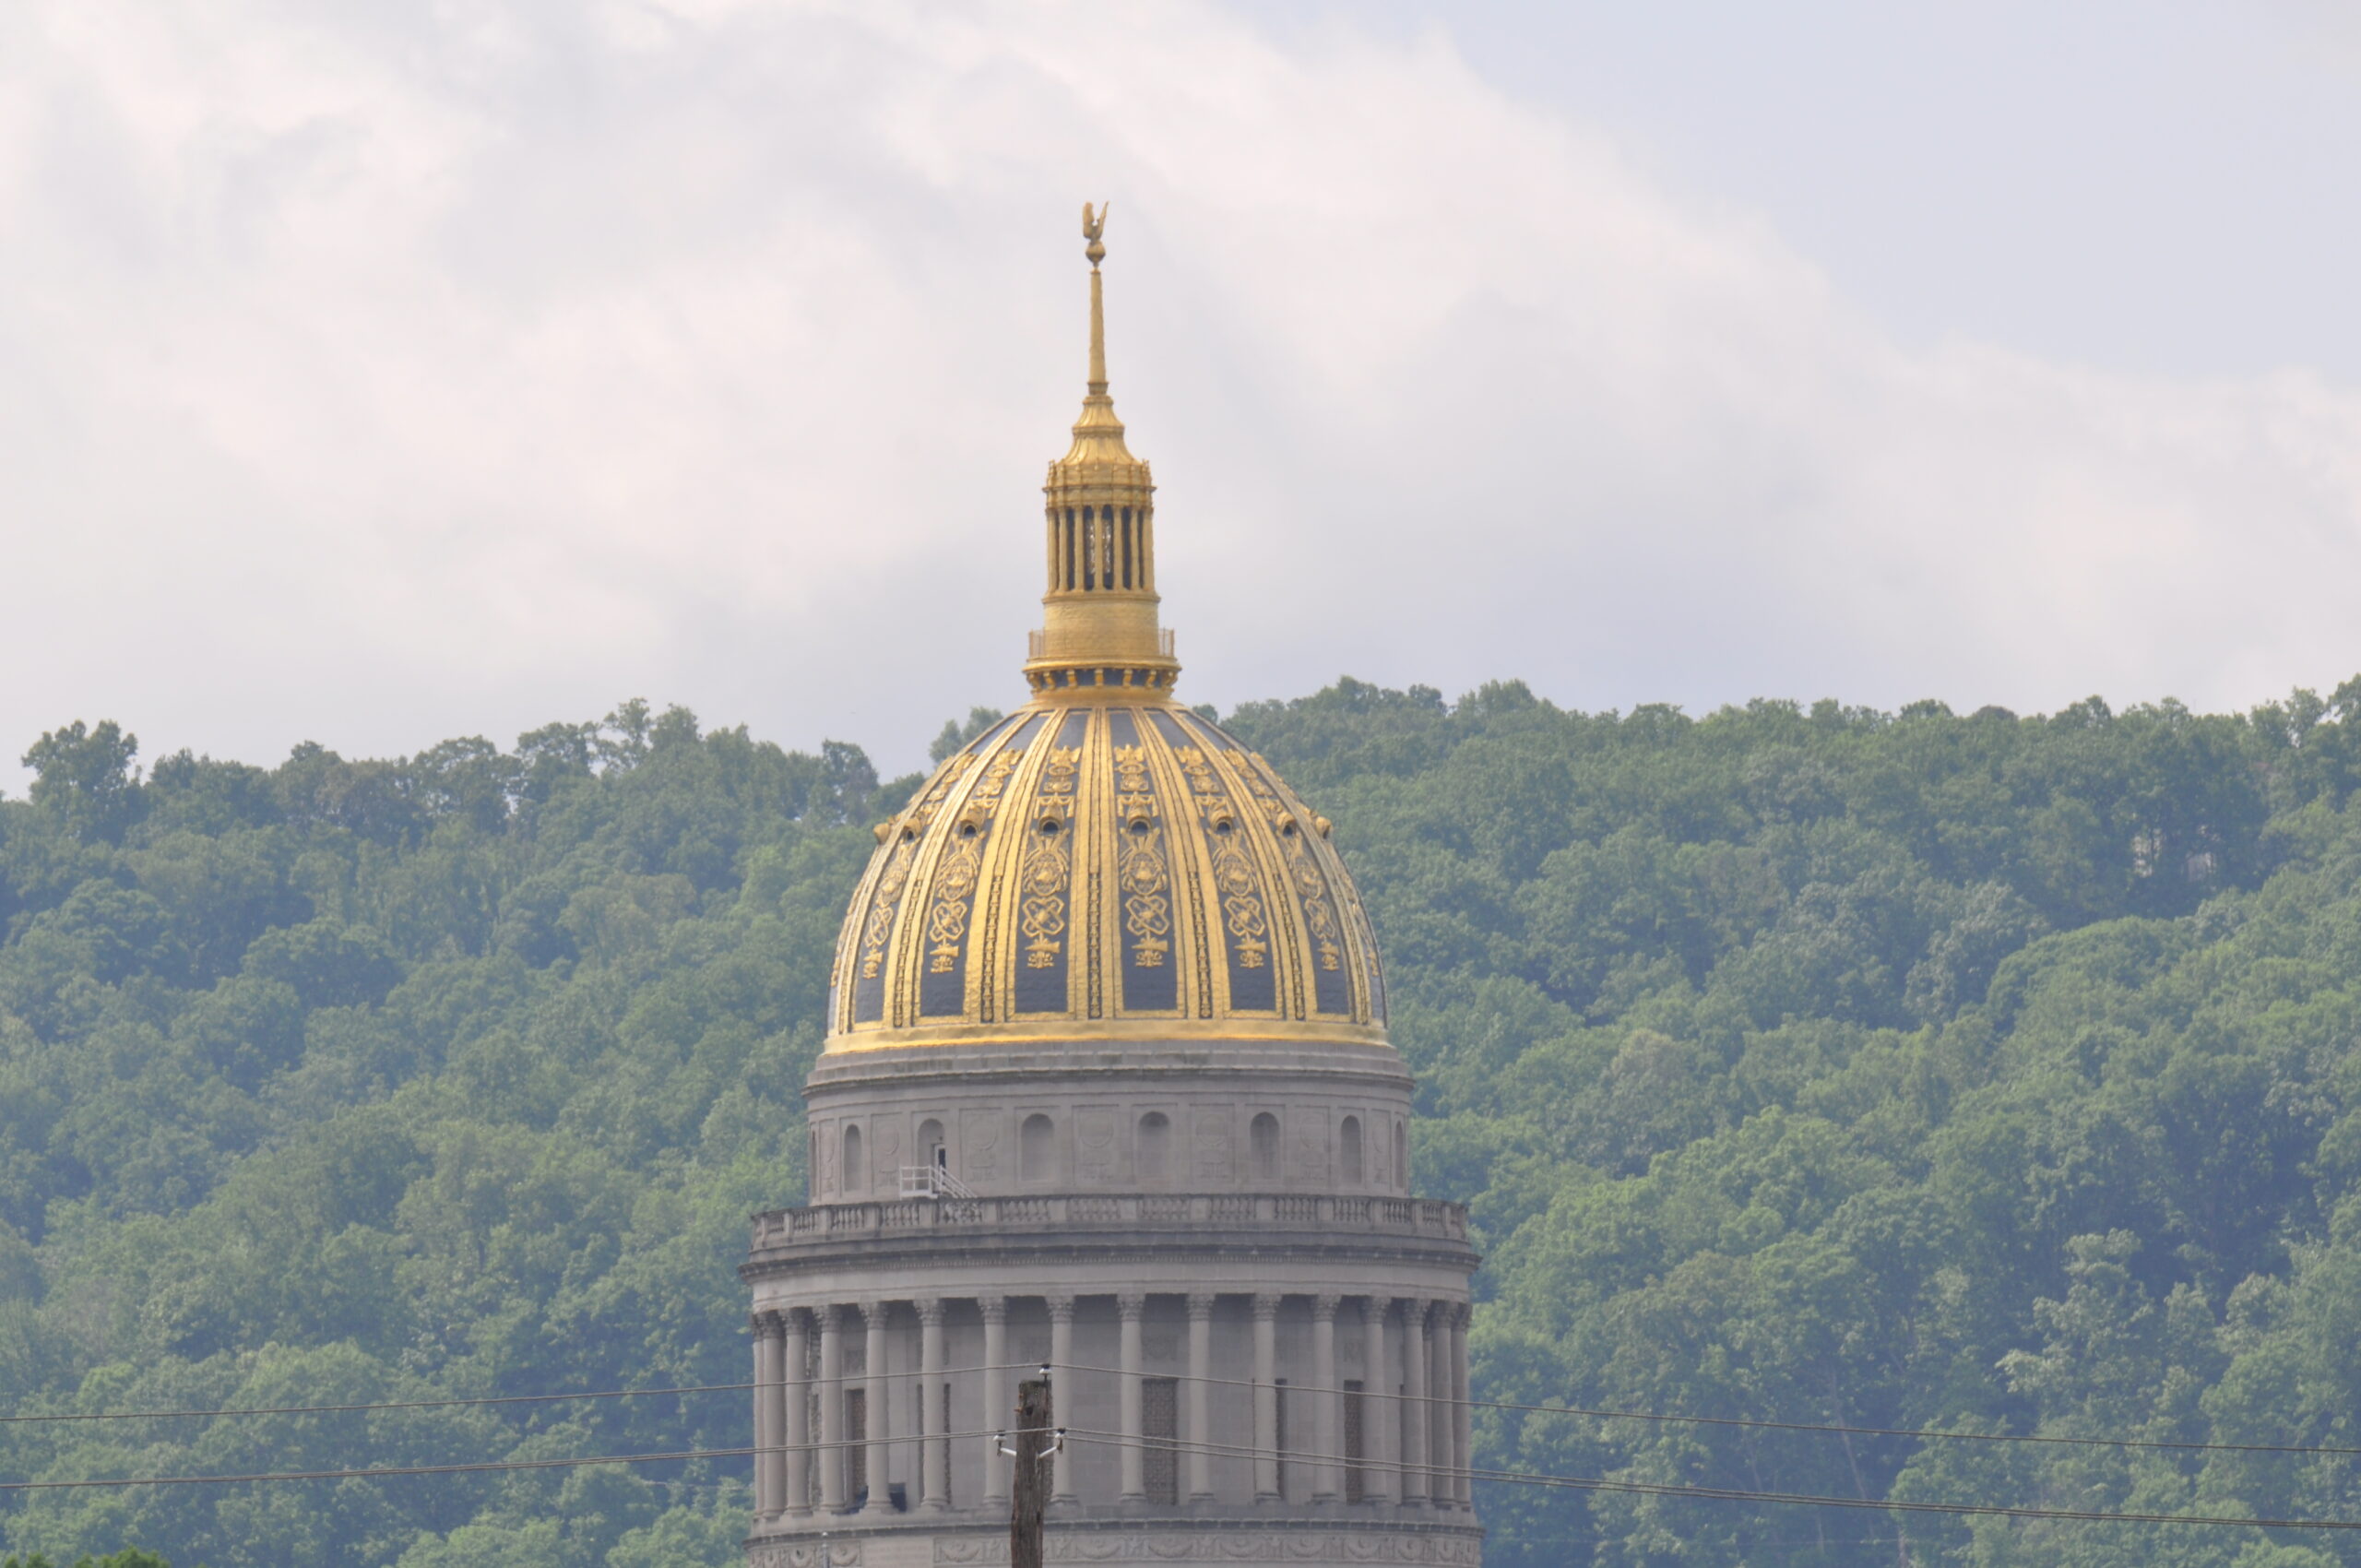 Flags to display at half-staff Saturday for former Delegate Tom Azinger – WV MetroNews